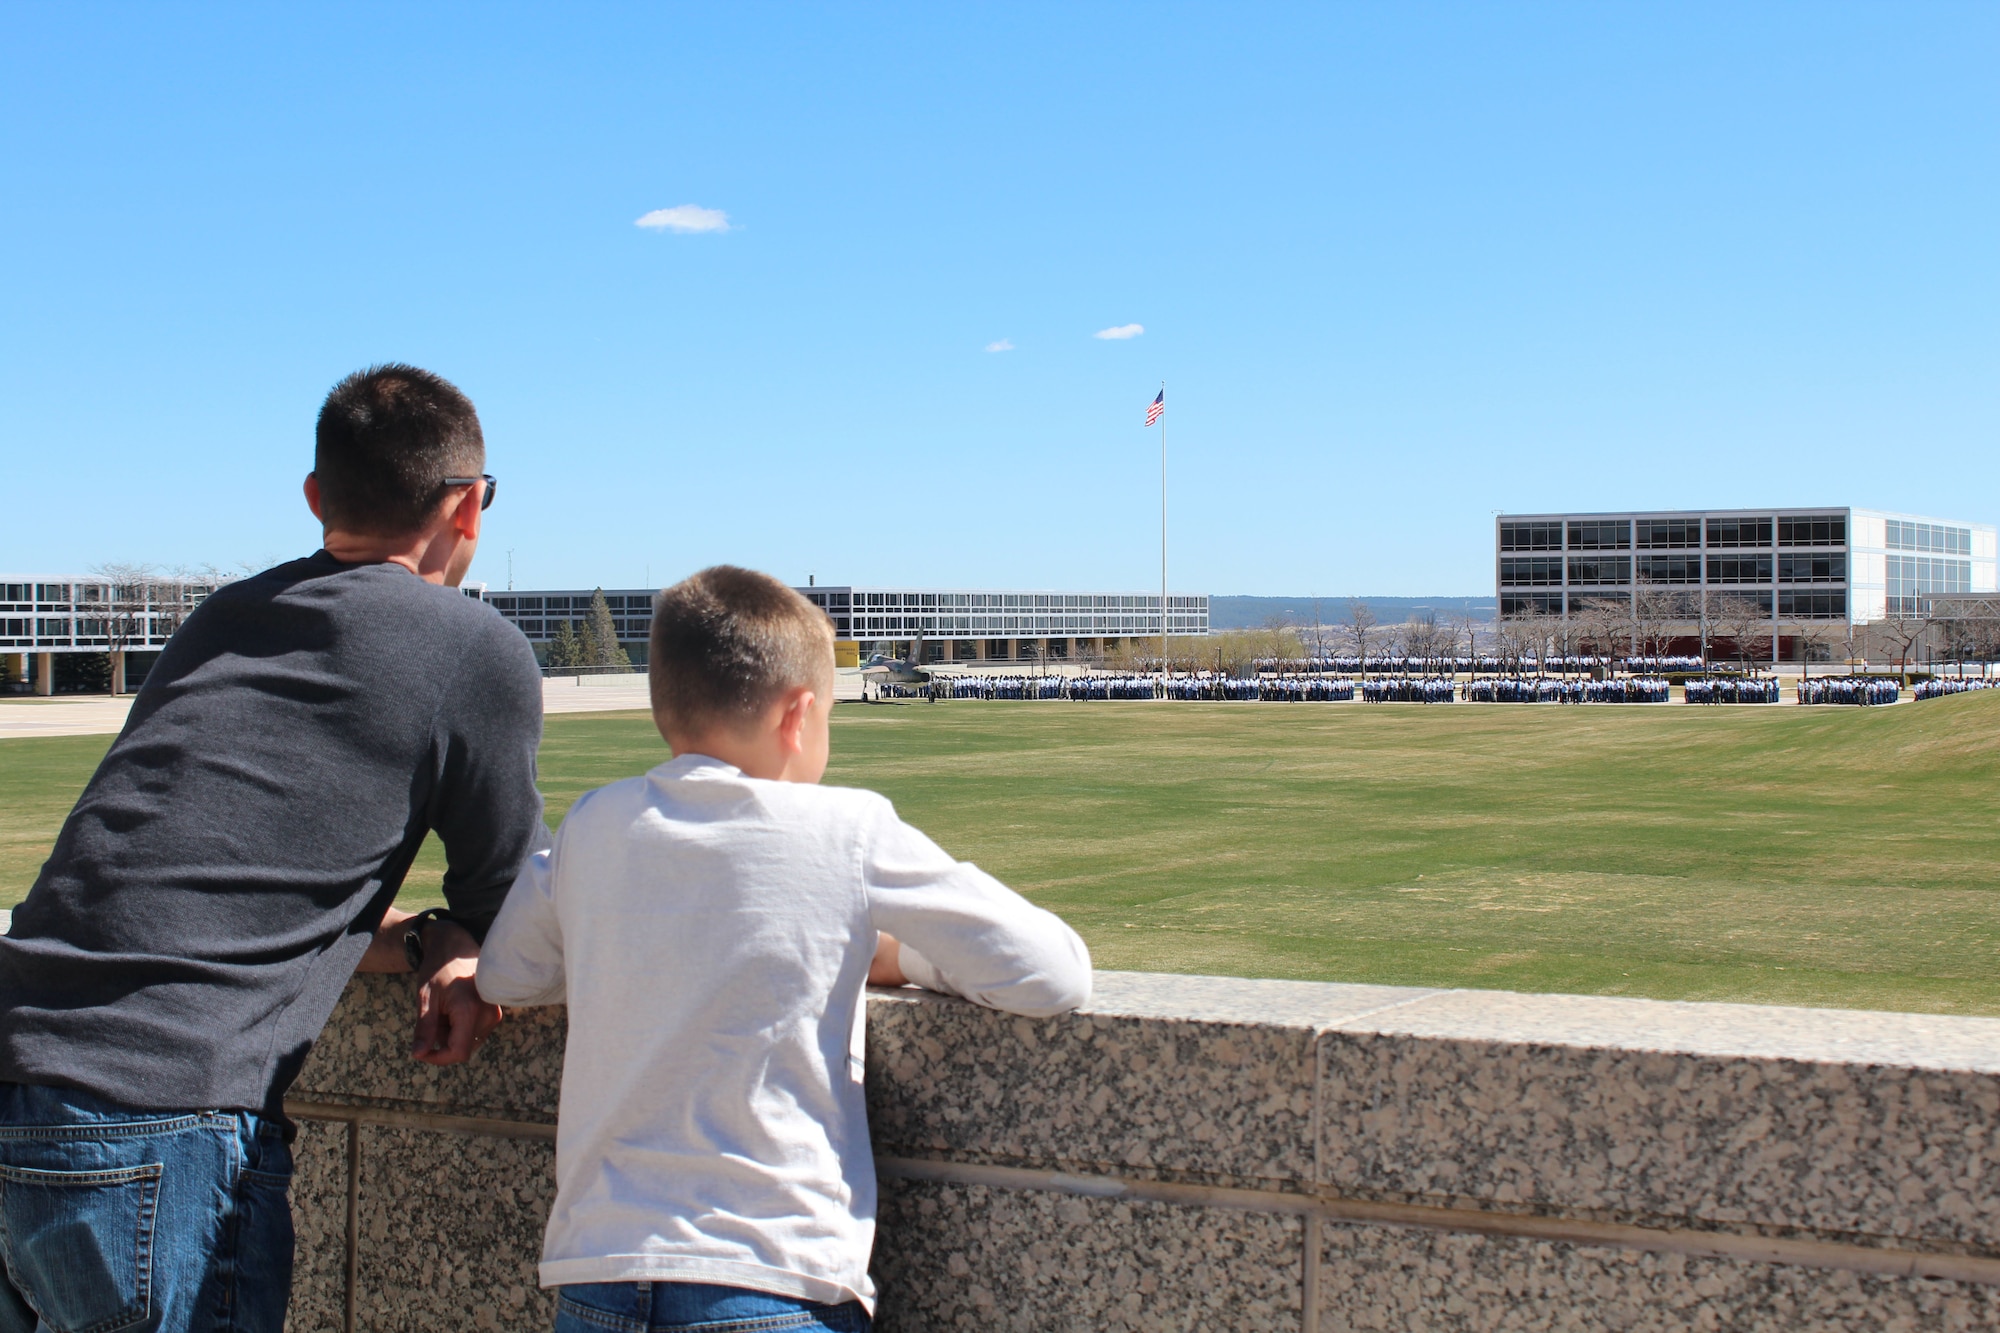 Col. Stuart Rubio, 403rd Wing commander, and his son Ashton look out over a parade field during a visit to the U.S. Air Force Academy in Colorado in 2015. Ashton, now 18, departs to start his first year at the Academy and is scheduled to graduate in the class of 2025. Rubio and his wife Megan both graduated from the Academy. (U.S. Air Force courtesy photo)